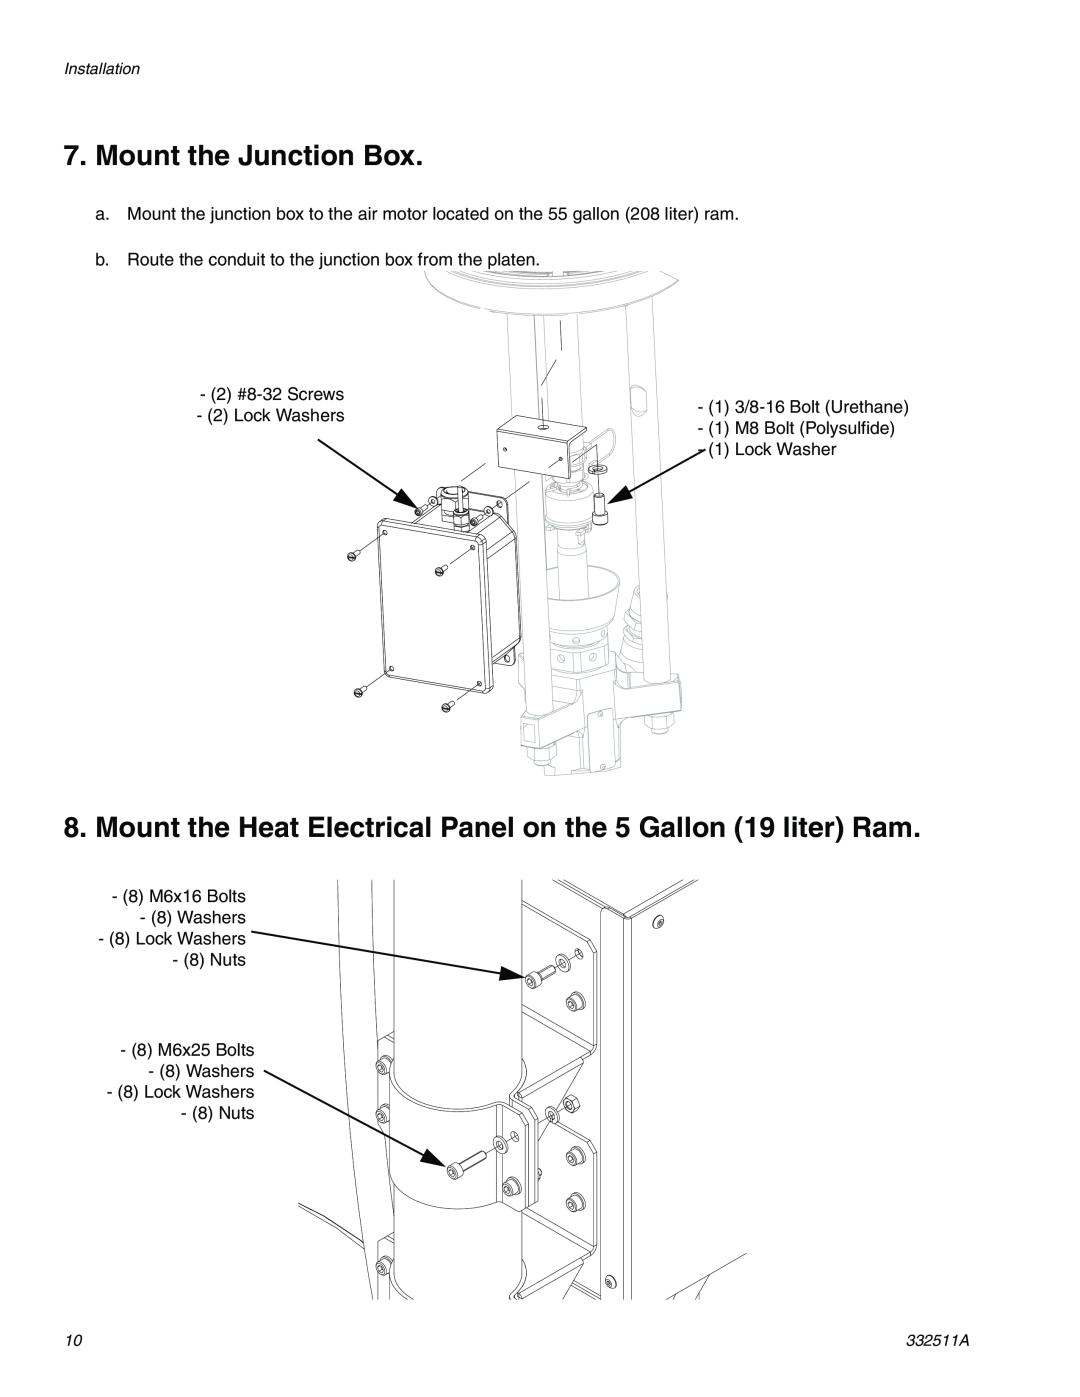 Graco 24R200 operation manual Mount the Junction Box 